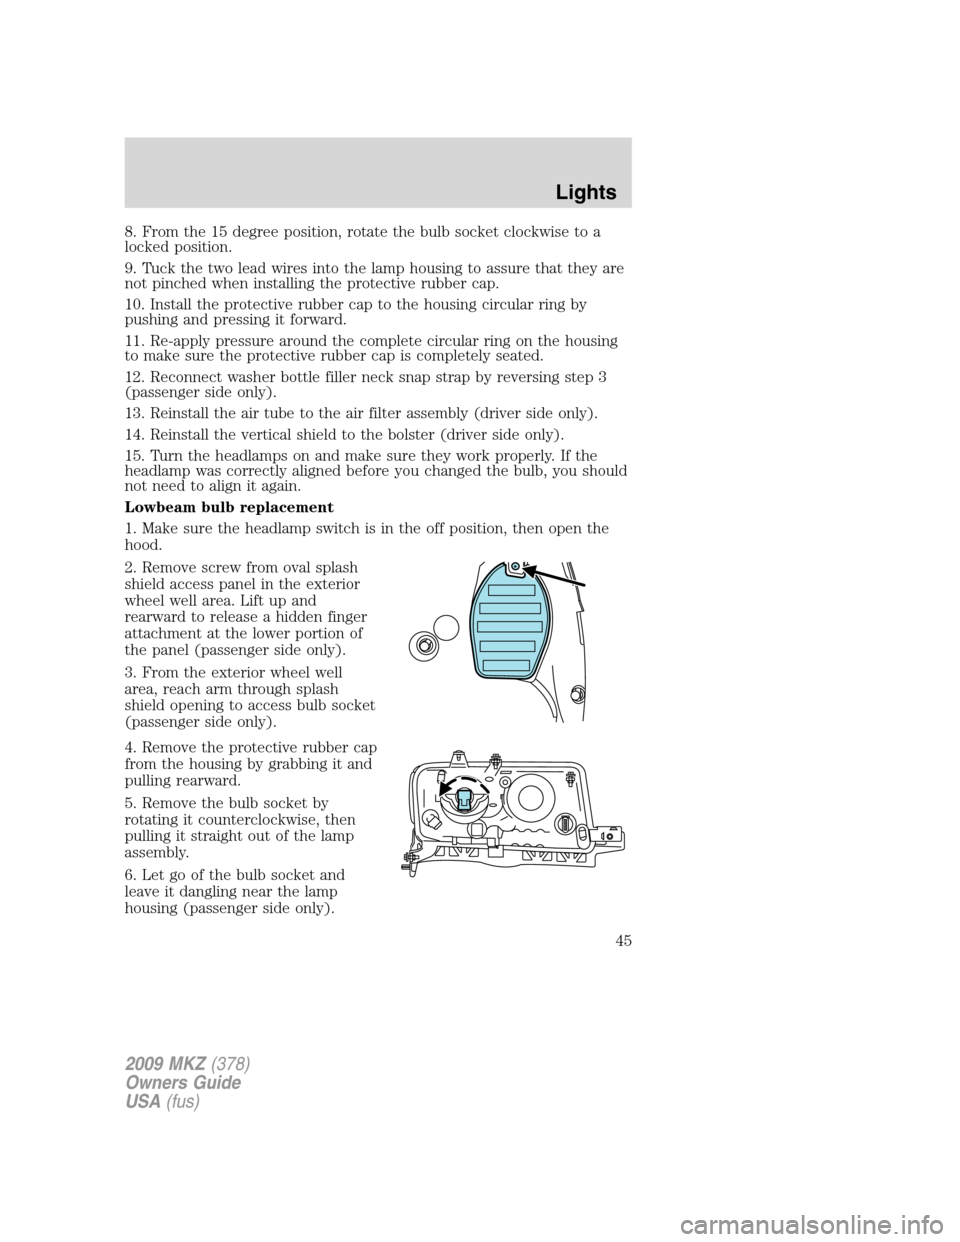 LINCOLN MKZ 2009  Owners Manual 8. From the 15 degree position, rotate the bulb socket clockwise to a
locked position.
9. Tuck the two lead wires into the lamp housing to assure that they are
not pinched when installing the protecti